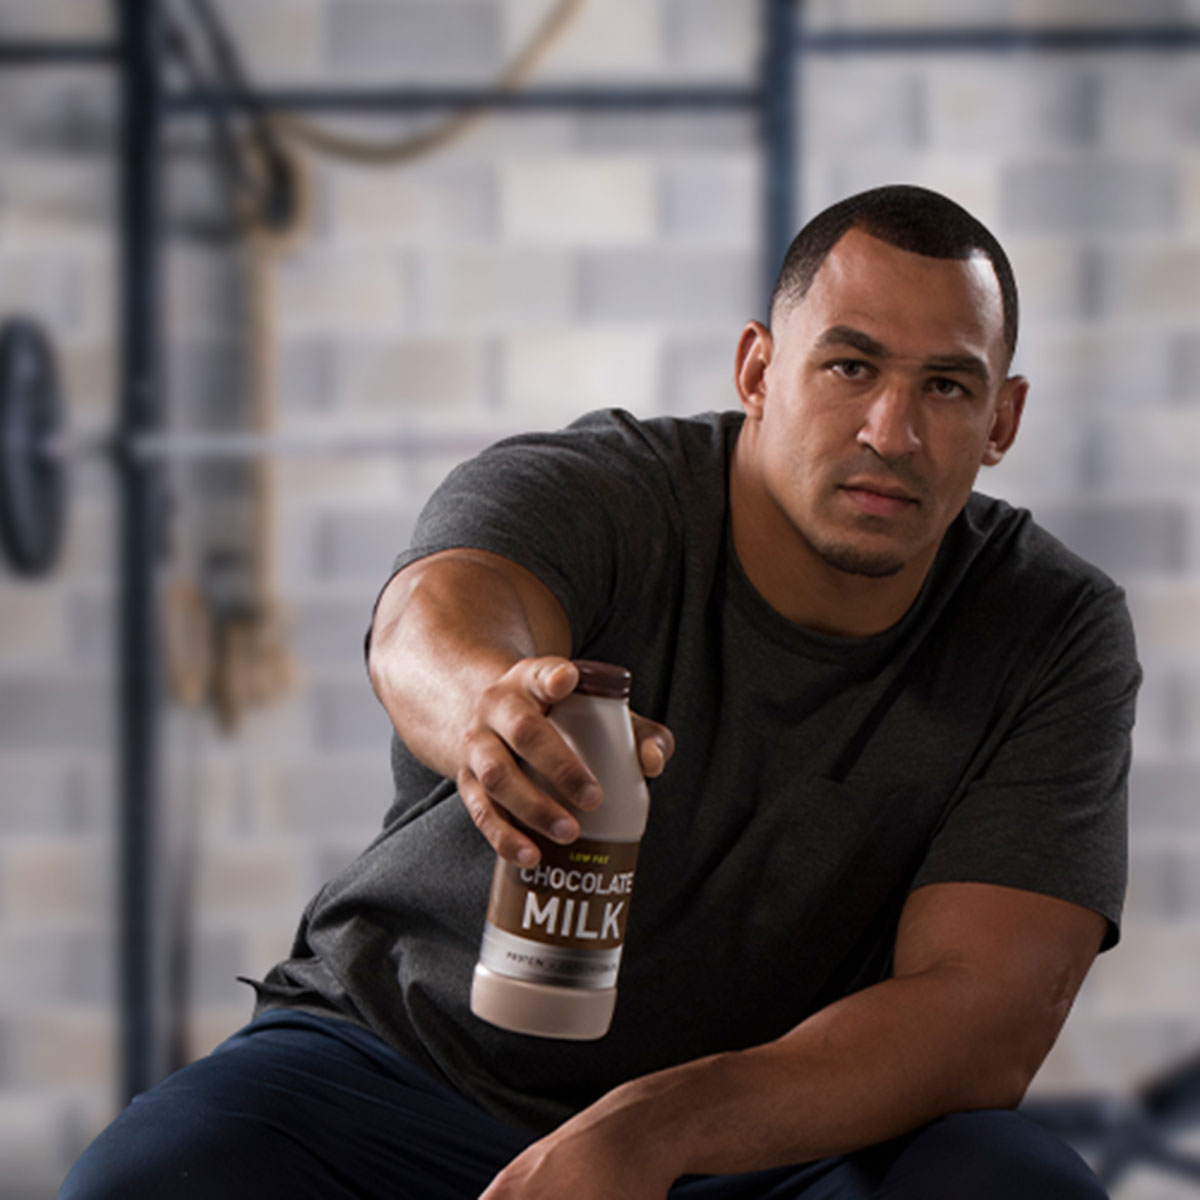 tyrone crawford holding out a bottle of chocolate milk